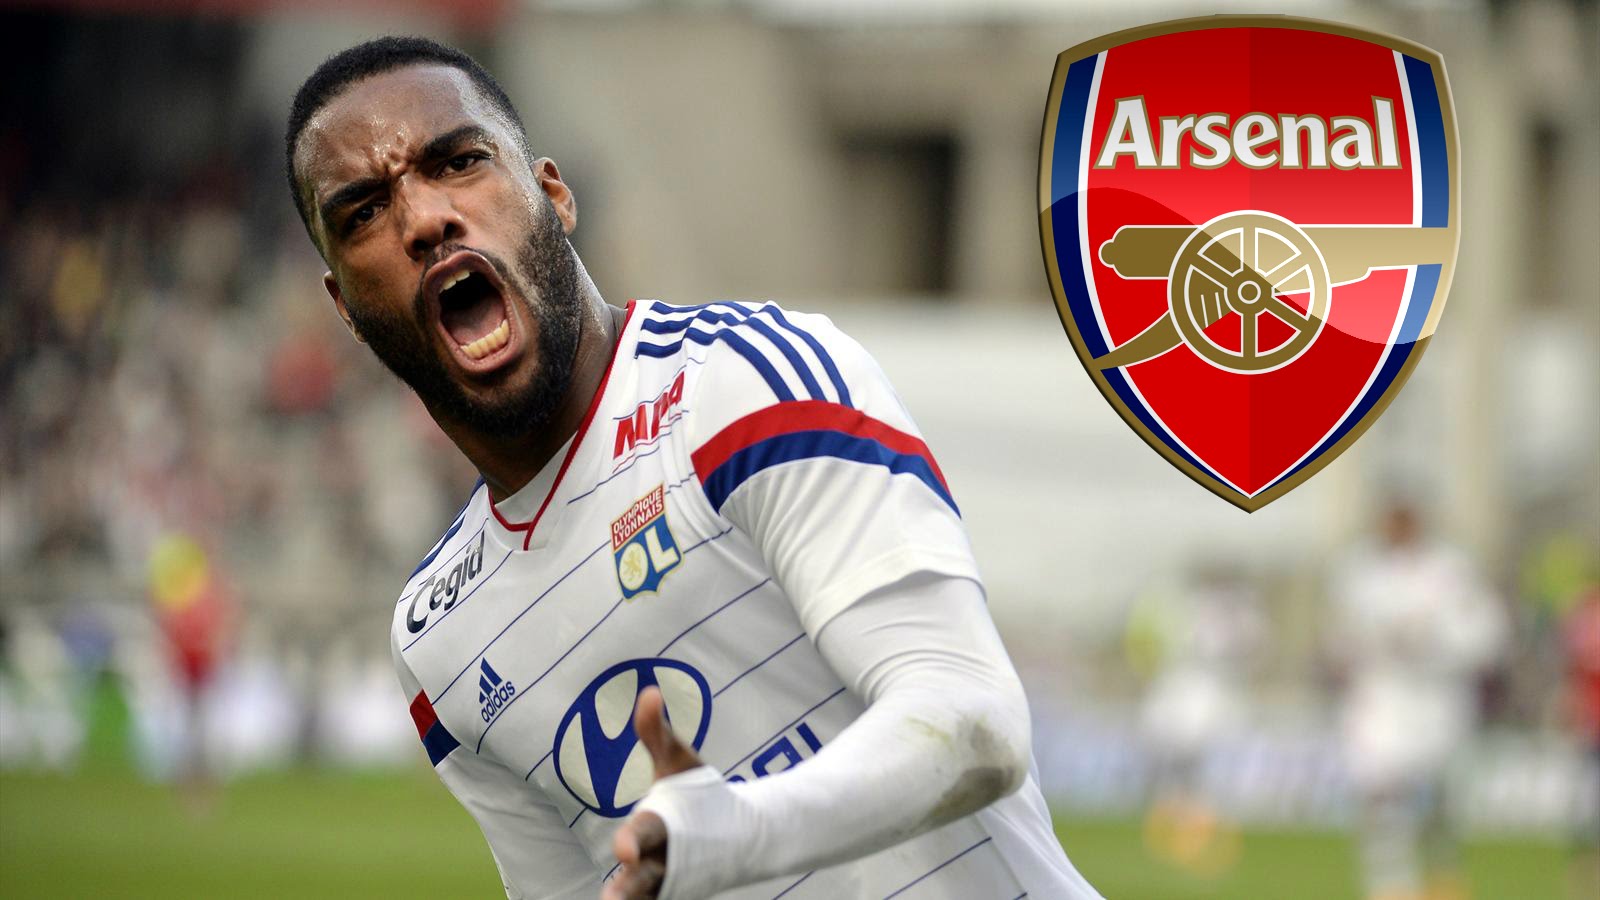 Arsenals first summer signing is lacazette